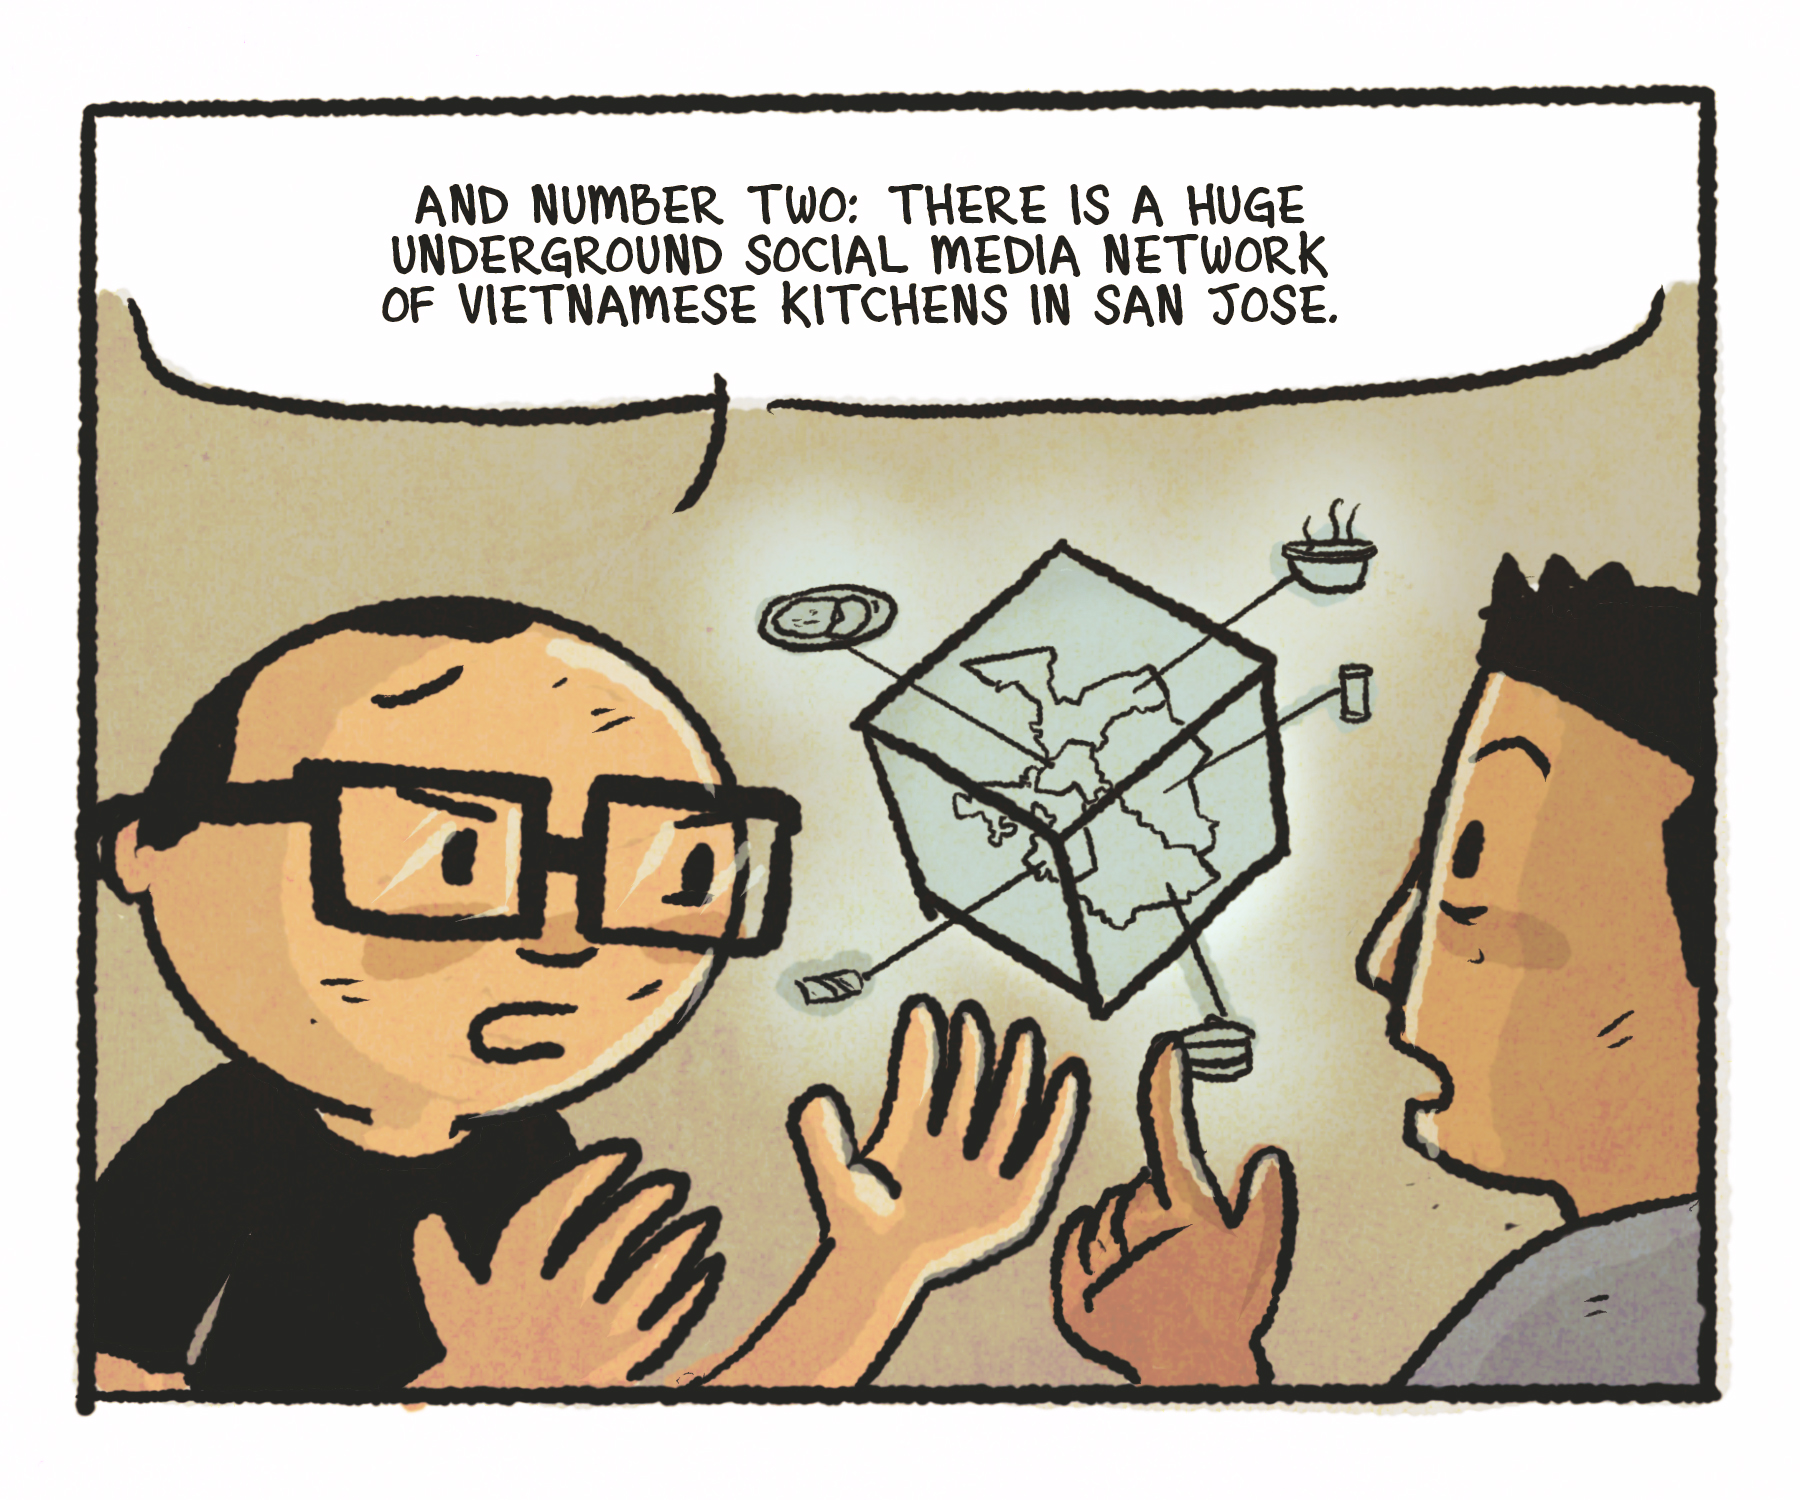 Comics panel: The man is pointing to an imaginary digital cube that represents the social media network. Speech bubble: "And number two: There is a huge underground social media network of Vietnamese kitchens in San Jose."